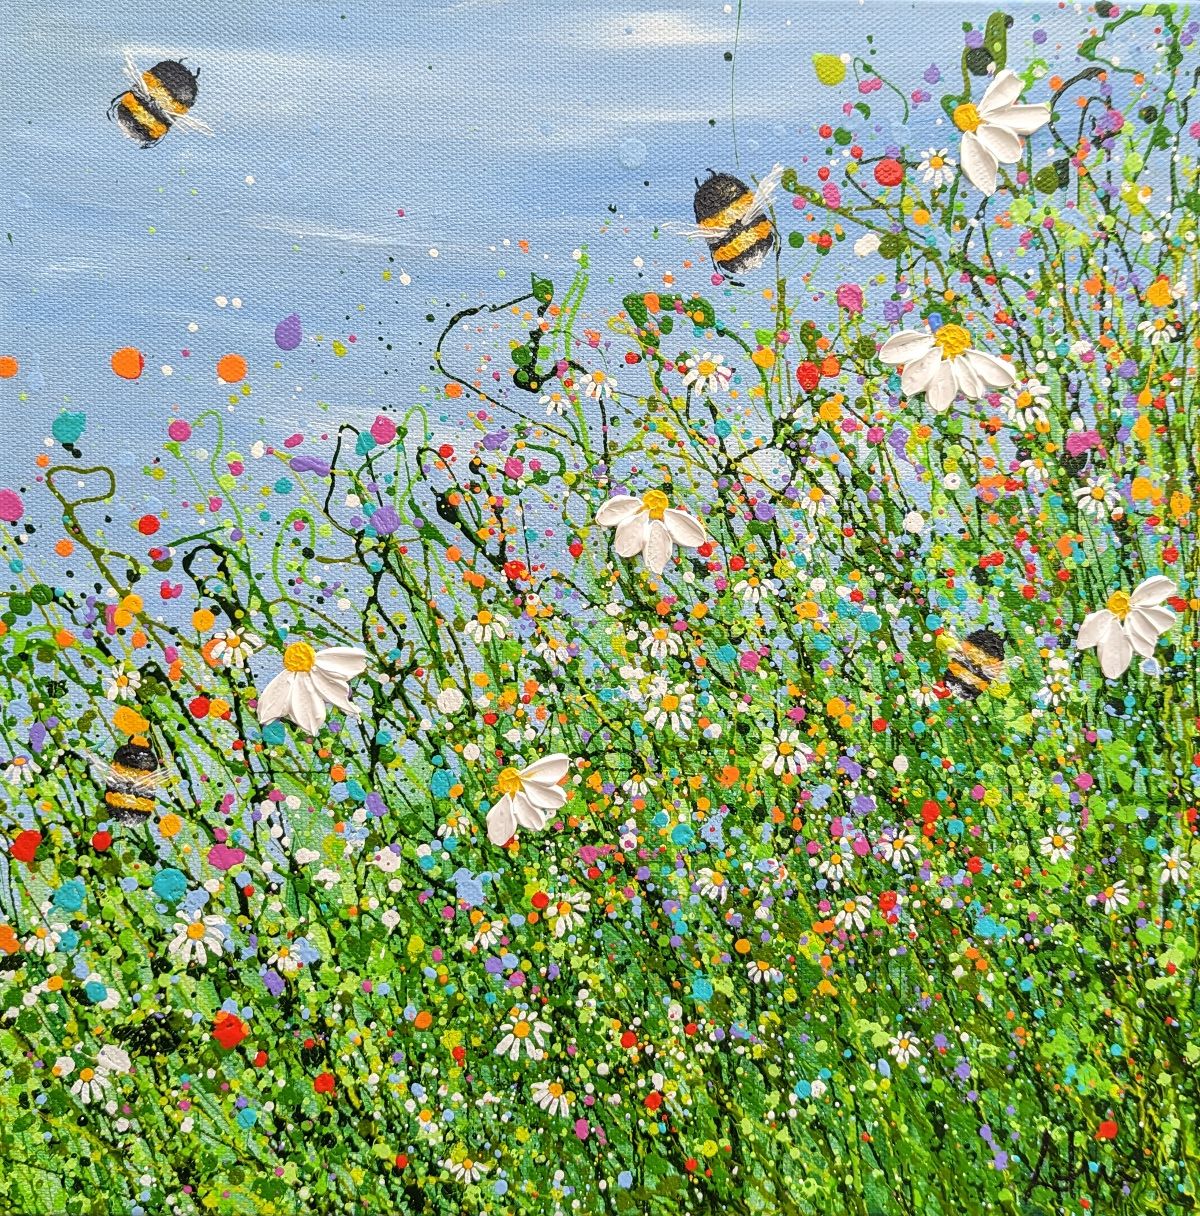 Bumbling Meadows 2 by Lucy Moore